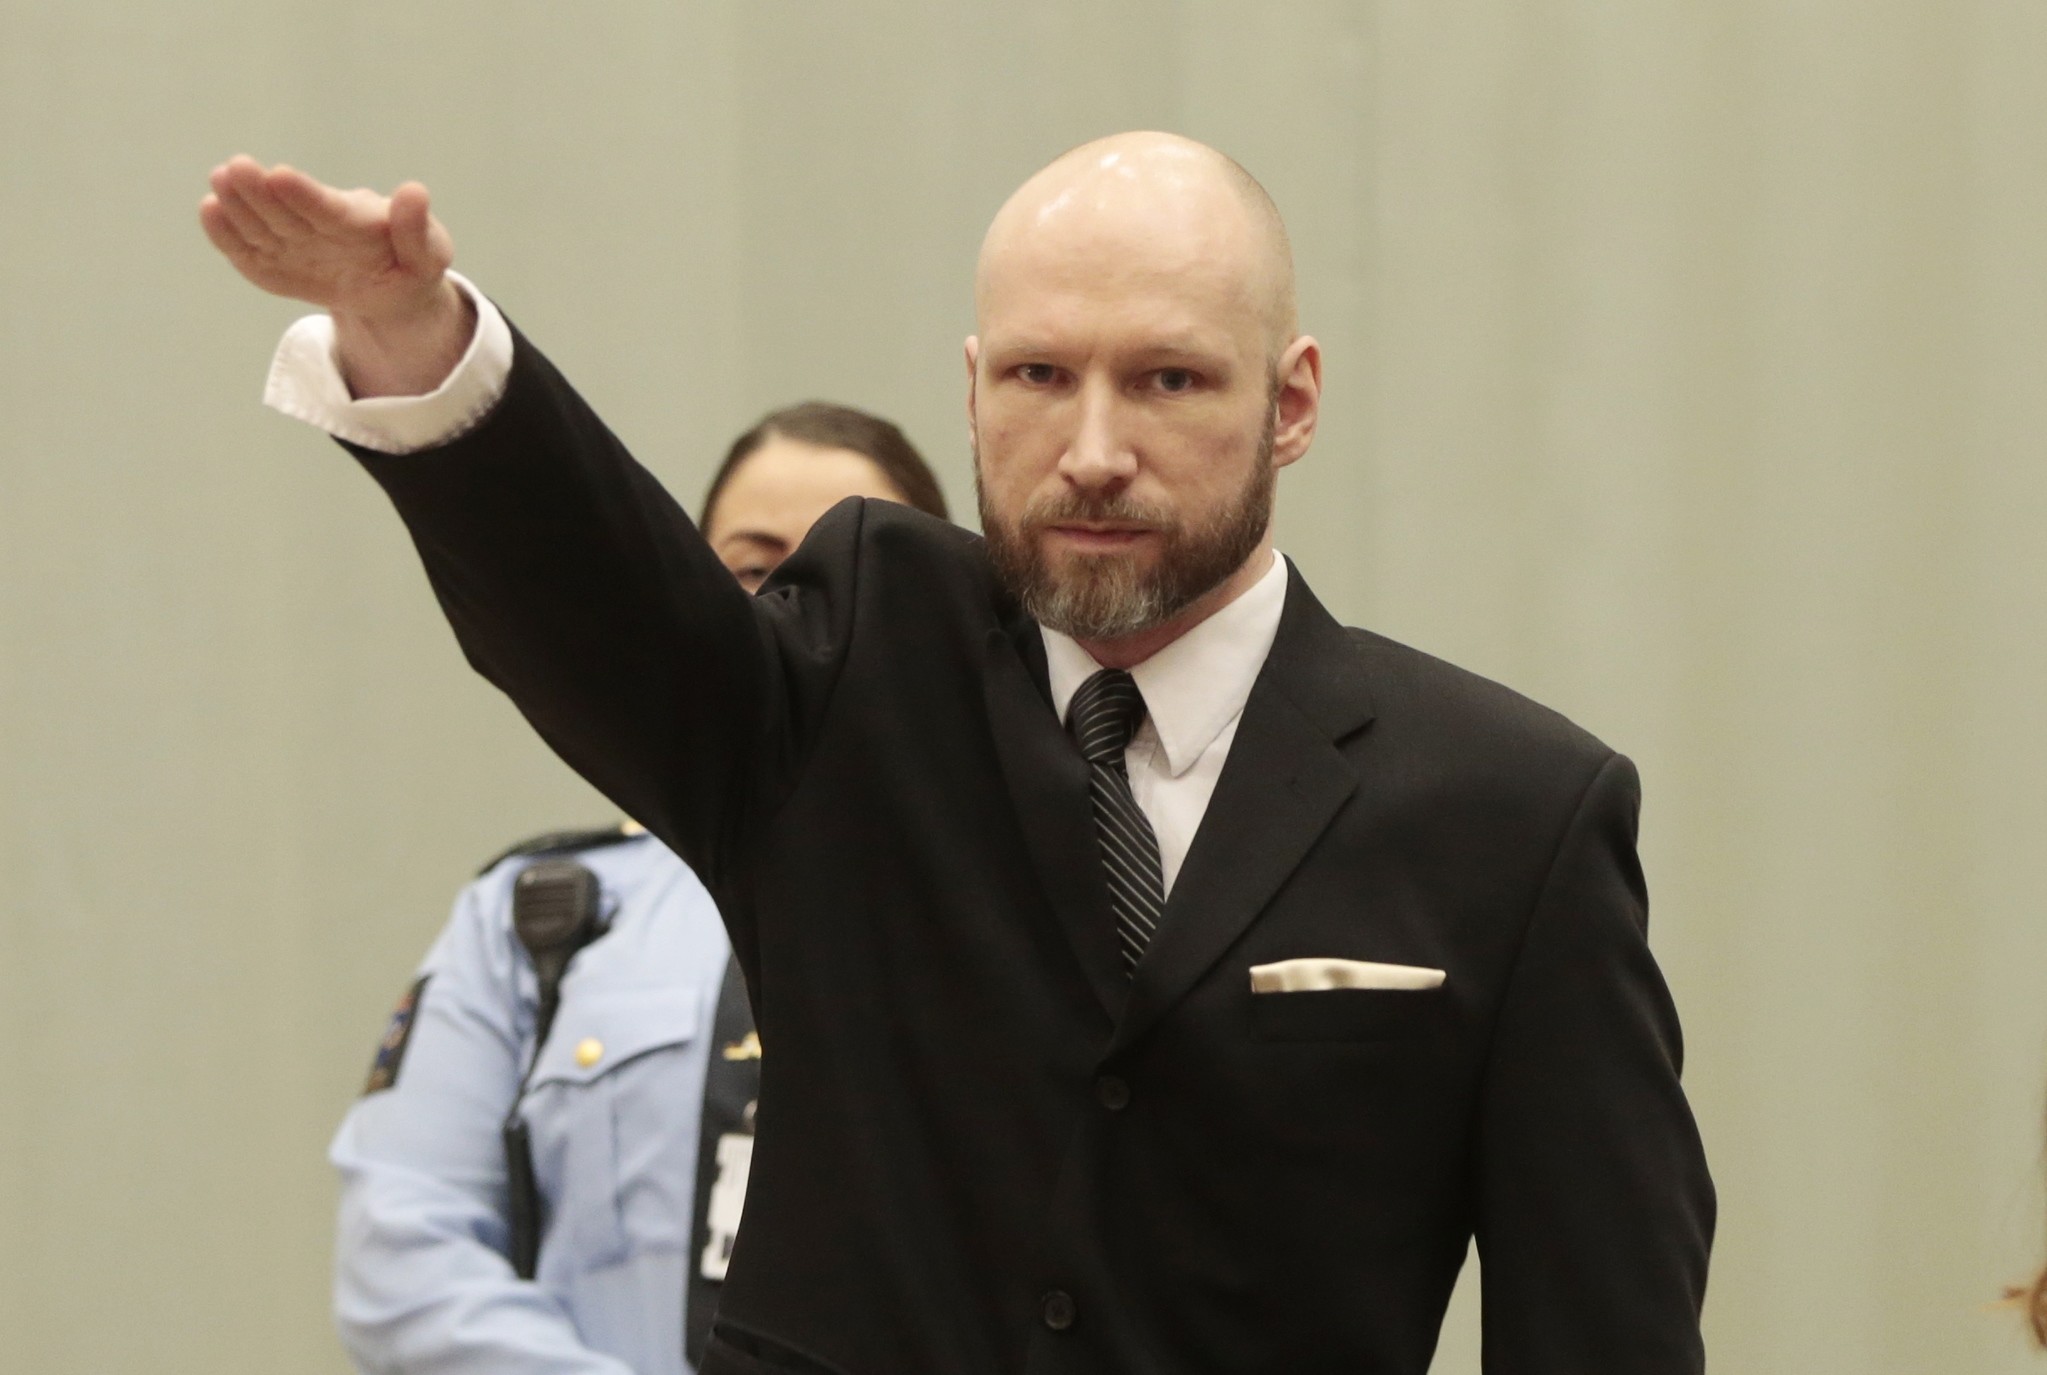 Anders Behring Breivik makes a Nazi salute ahead his appeal hearing at a court at the Telemark prison in Skien, Norway, on January 10, 2017. (AFP Photo)